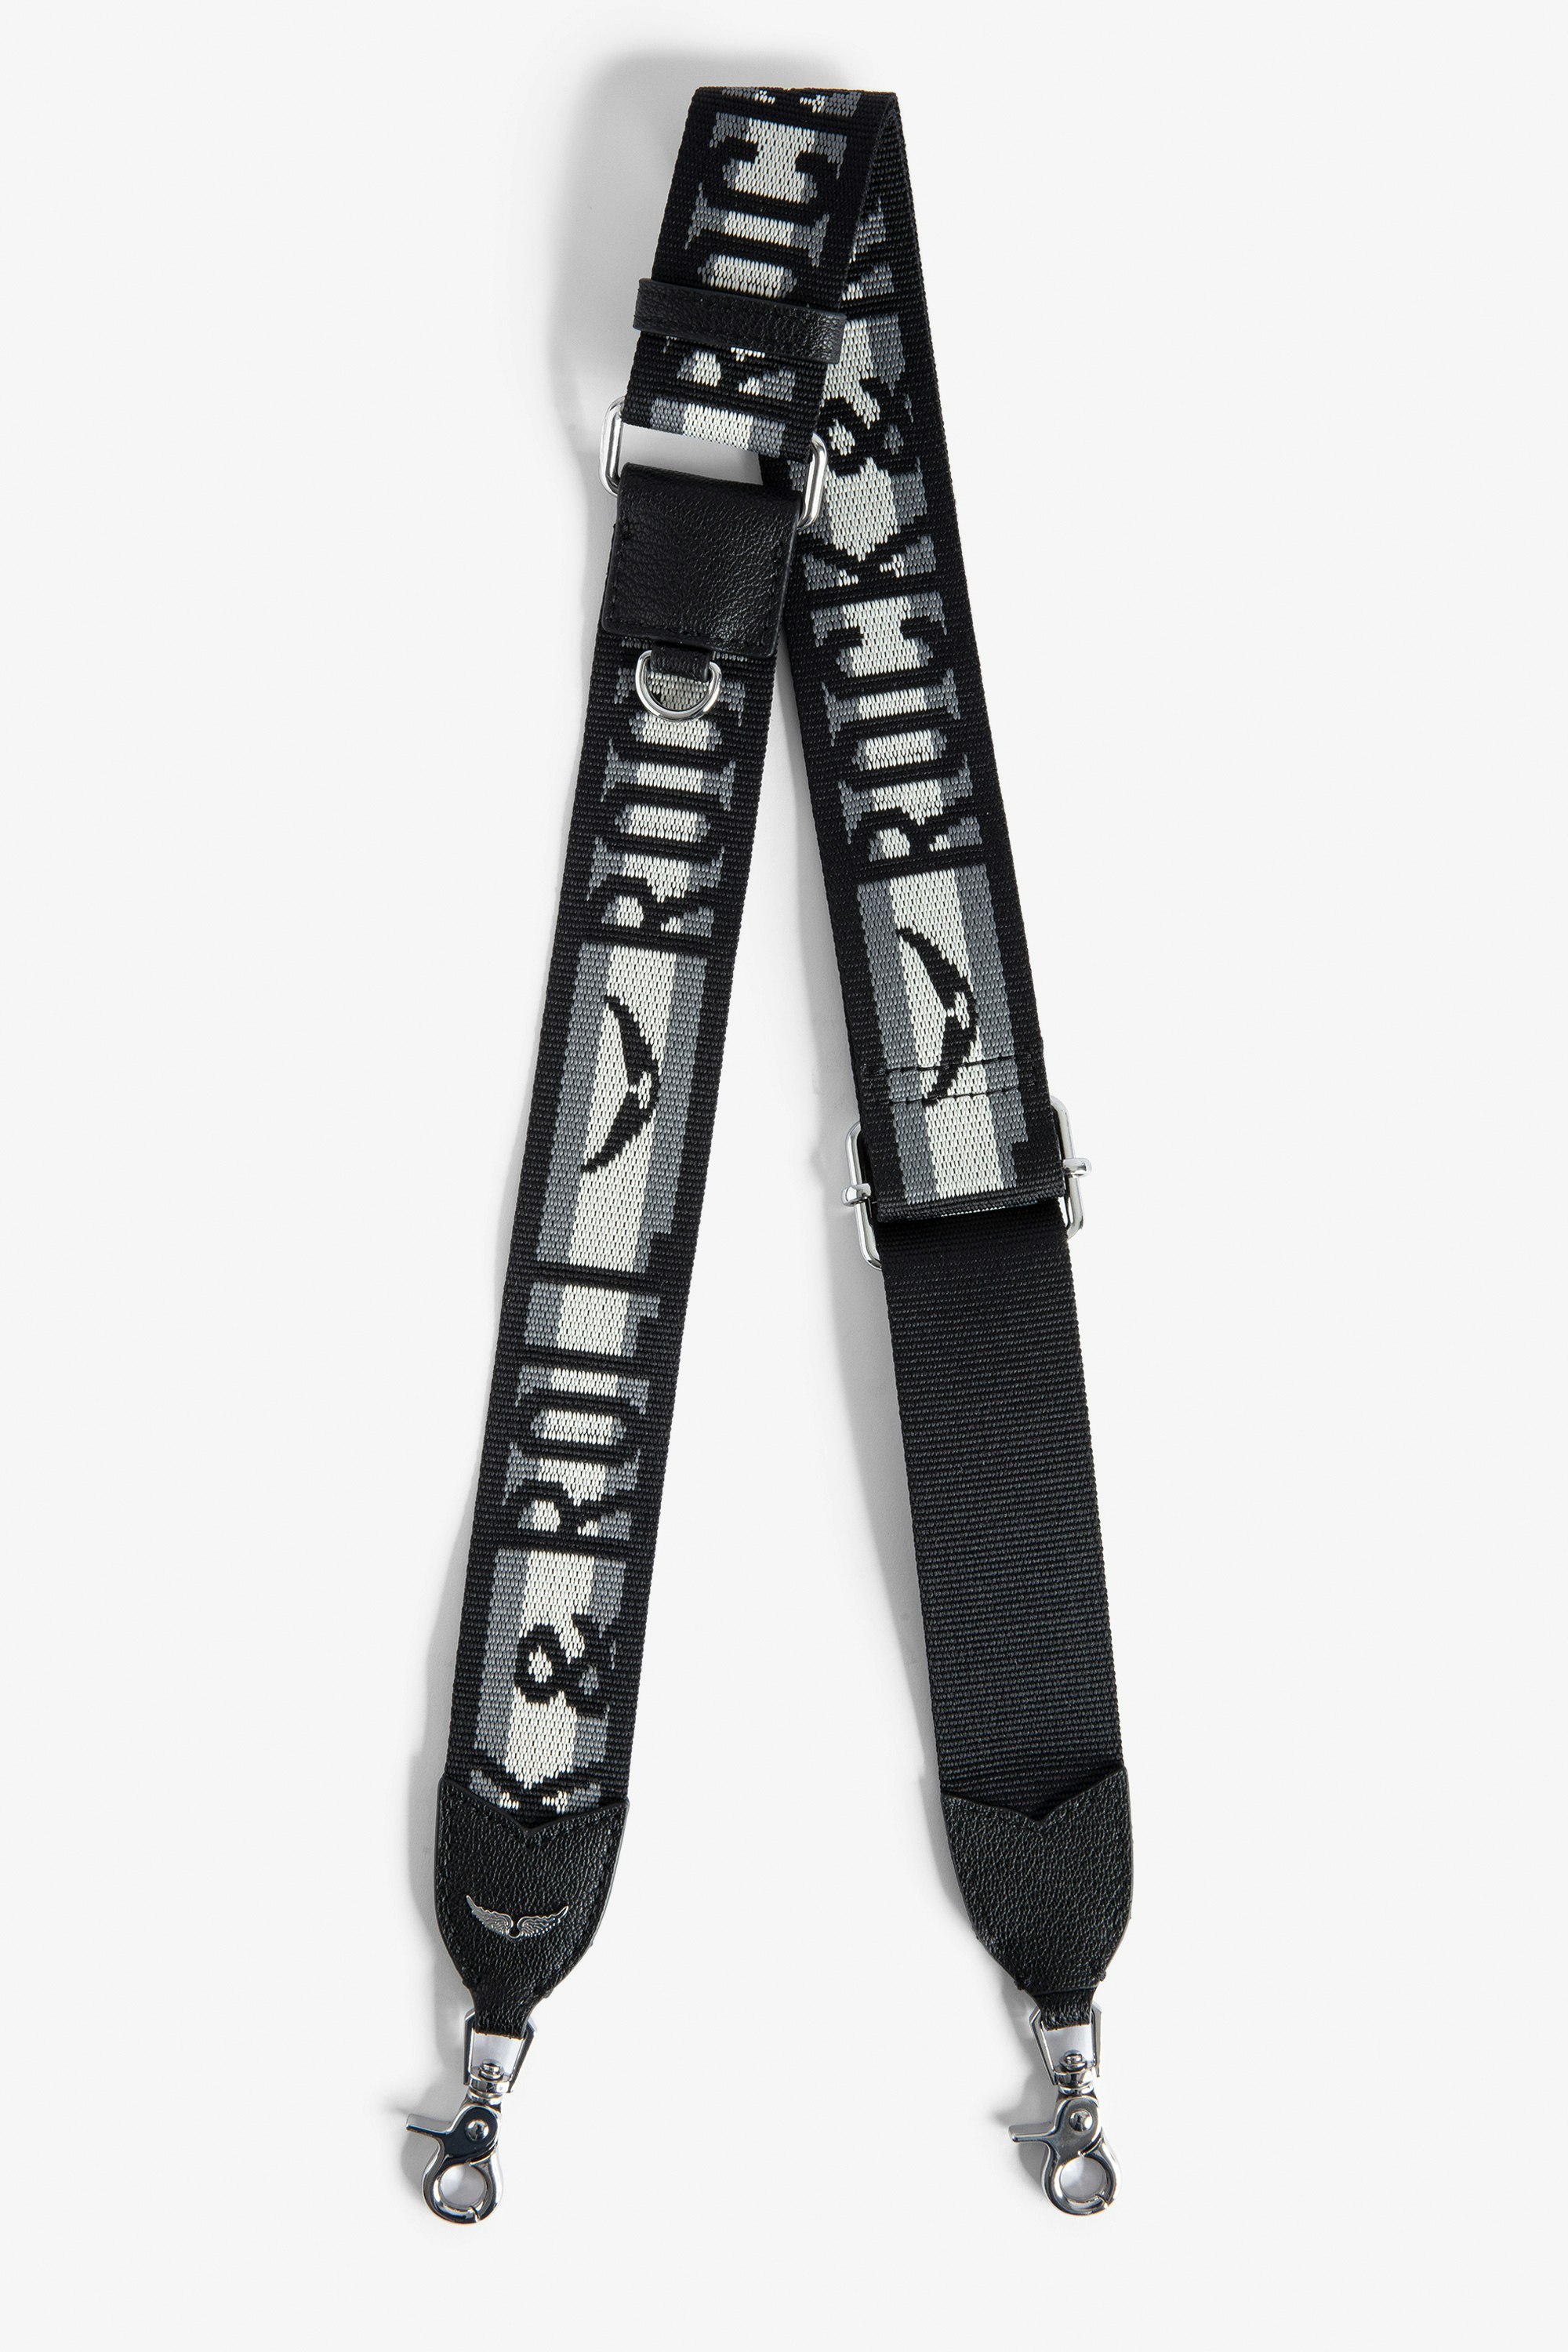 Zadig Shoulder Strap Women’s grey leather and nylon shoulder strap with “Rock & Roll” slogan and wings motif.